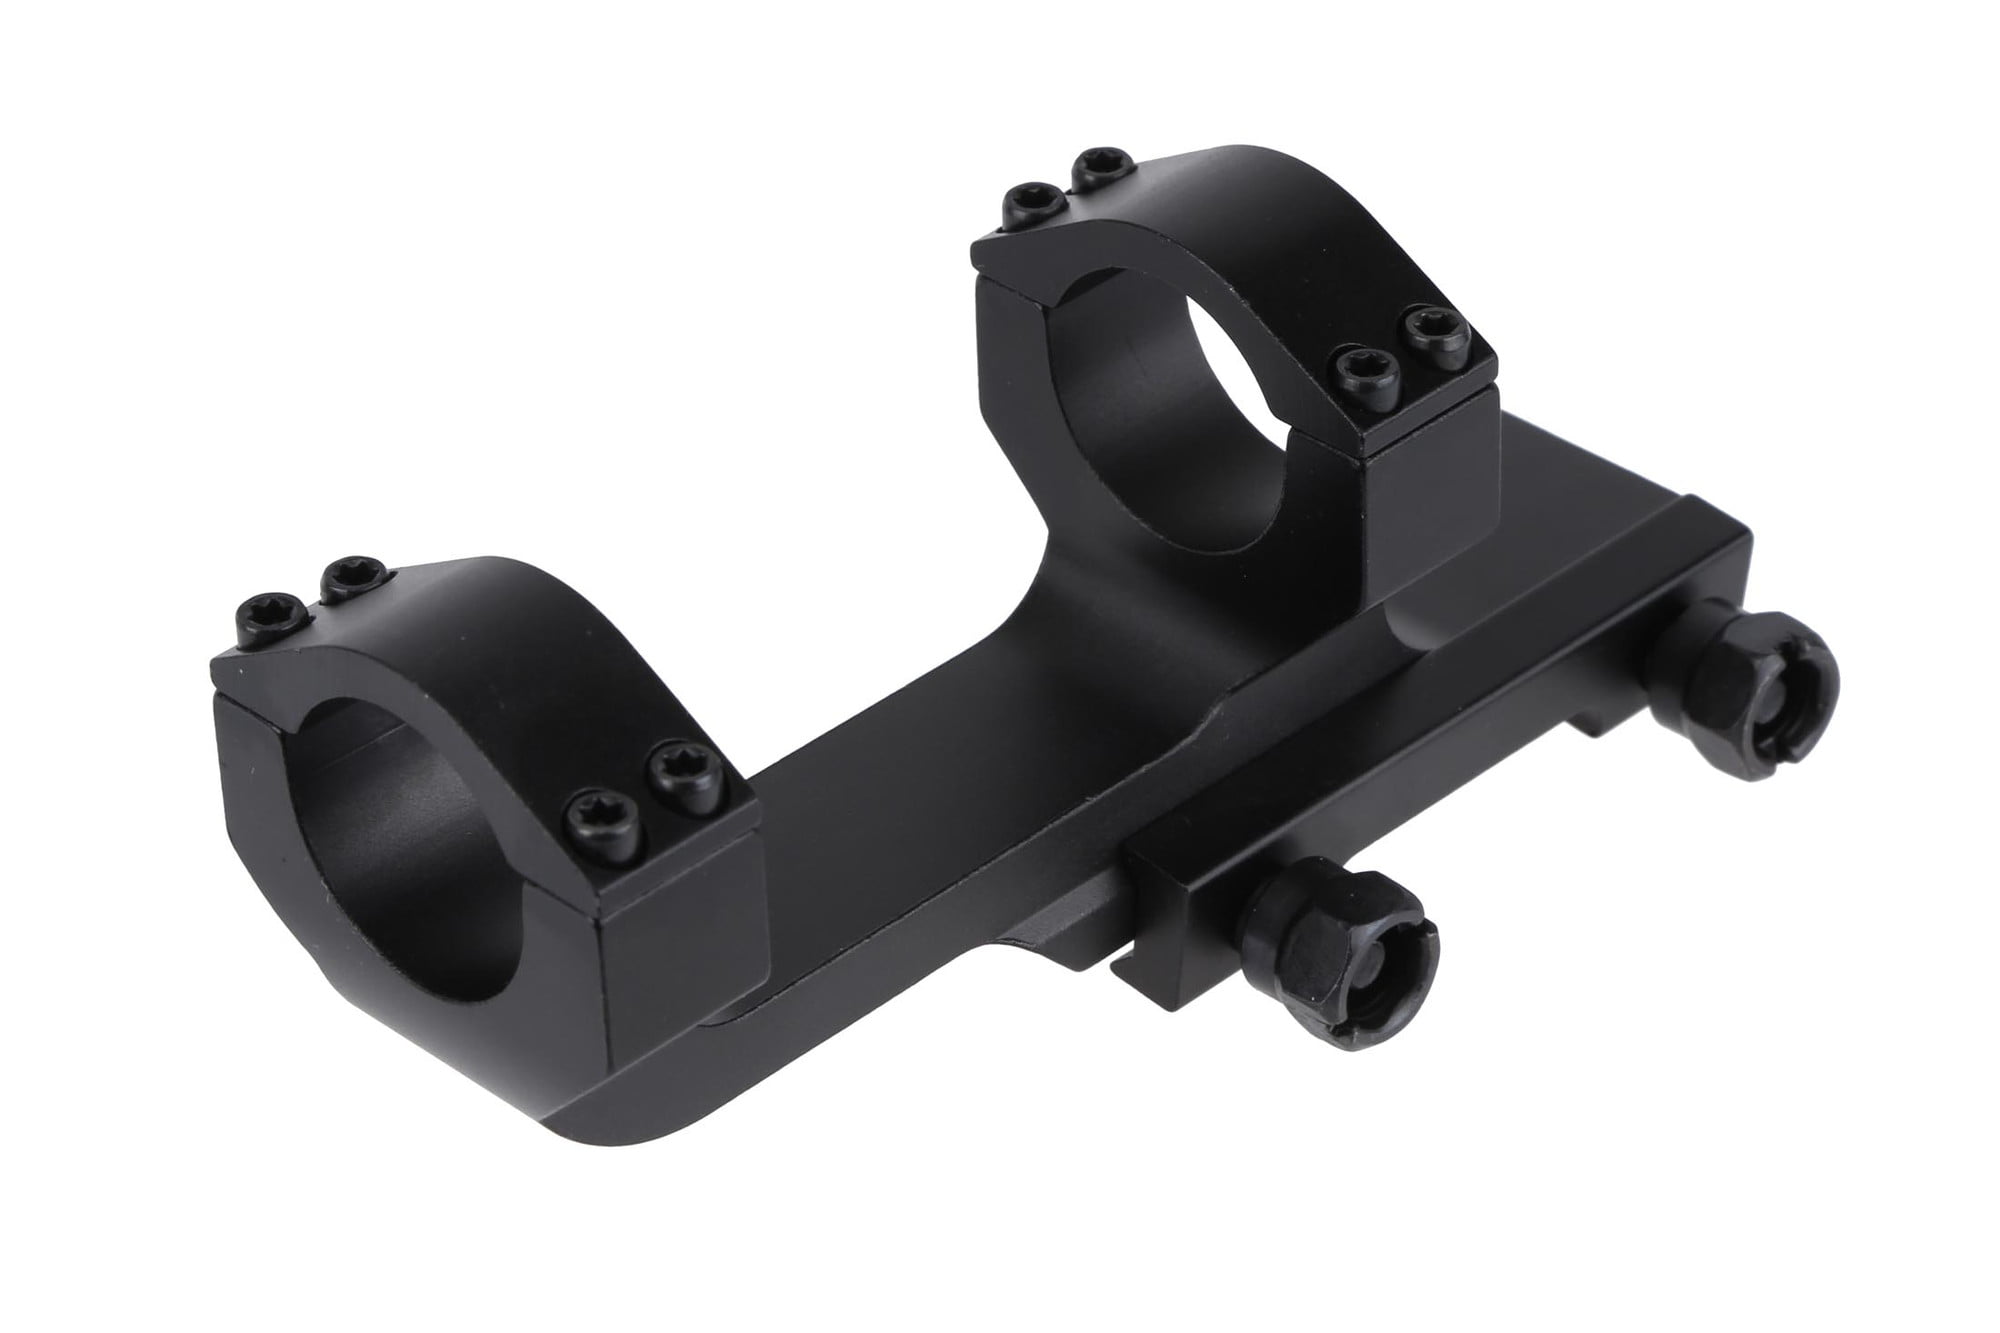 30mm Tactical Dual Ring Cantilever Scope Mount w Picatinny rail tops for Burris